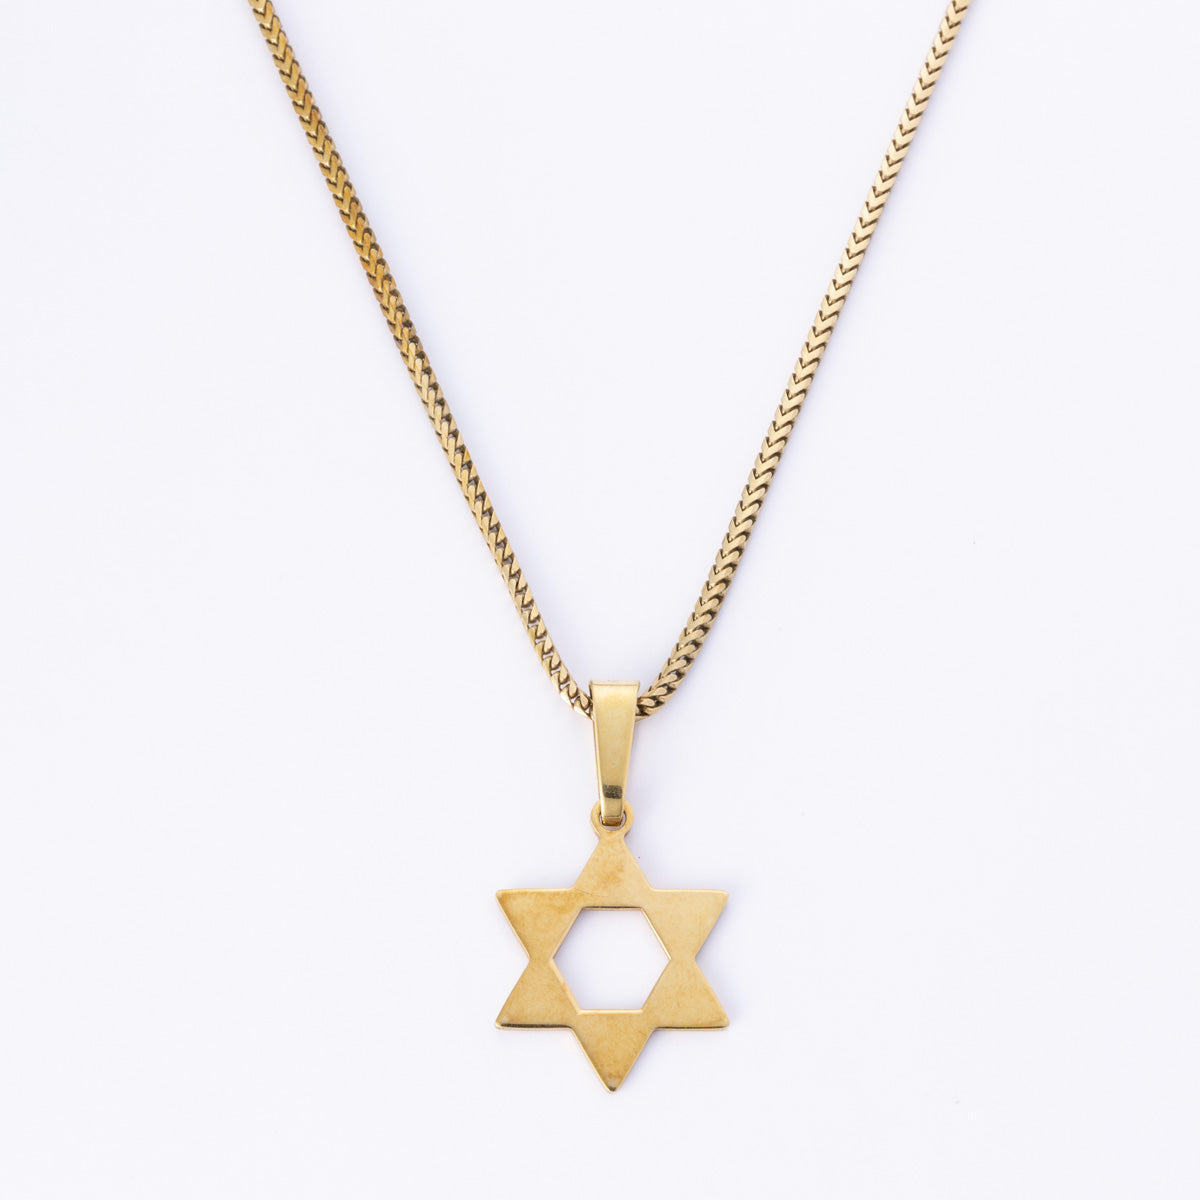 10k Yellow Gold Star Pendant Necklace | 17.5